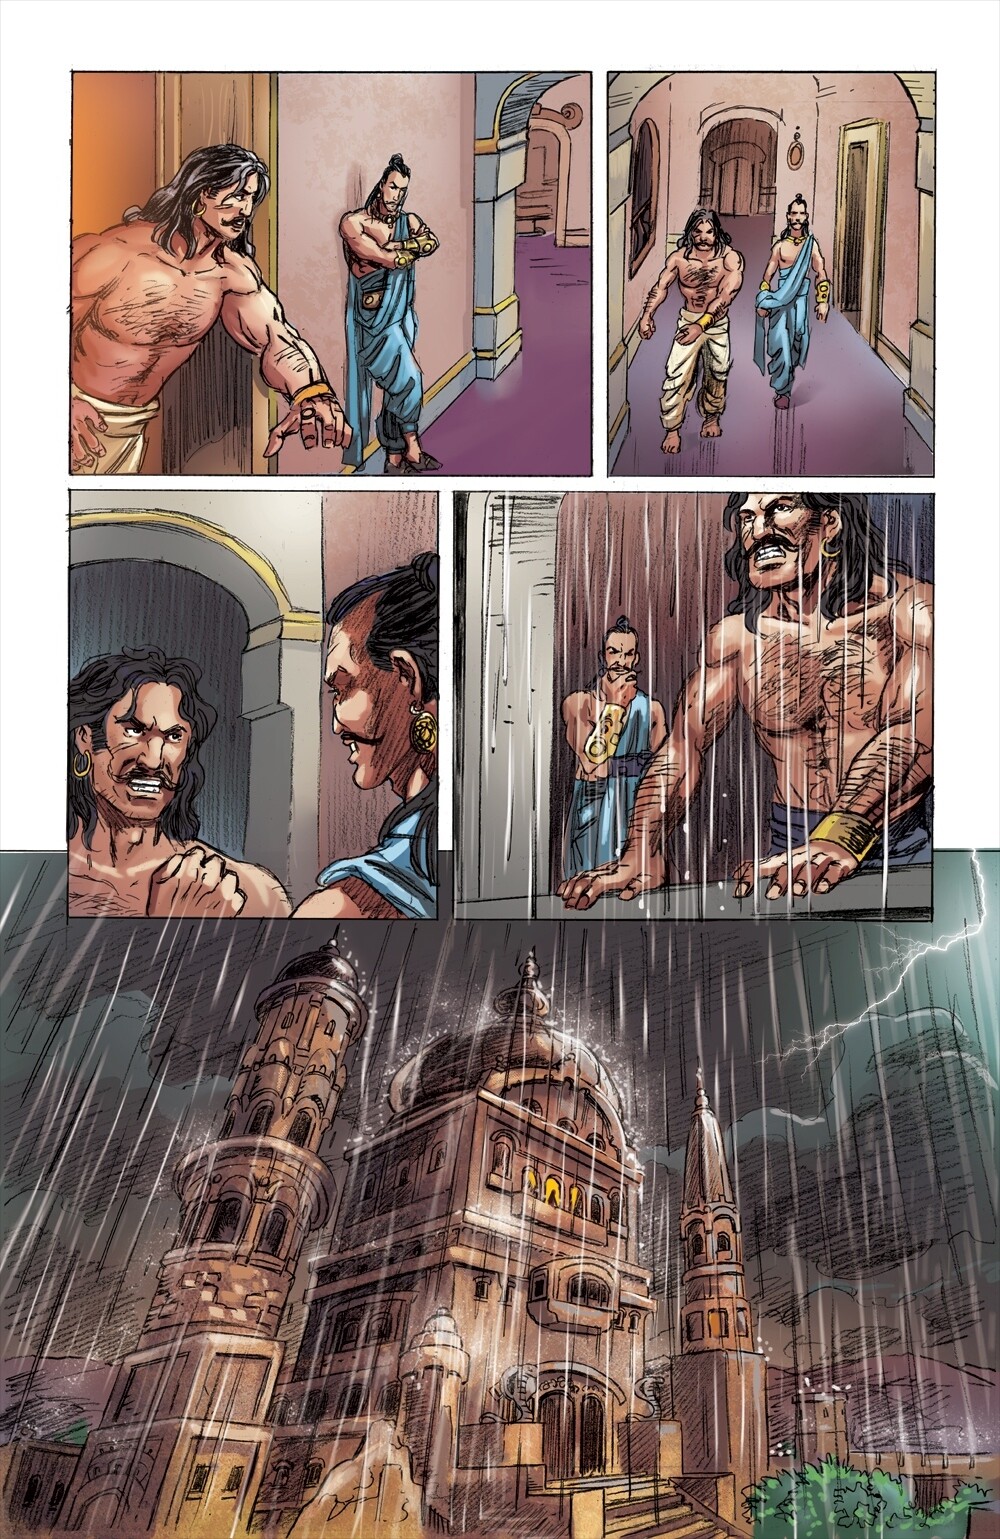 Scions of the Cursed King #2
Page 14, color by Vivek Goel